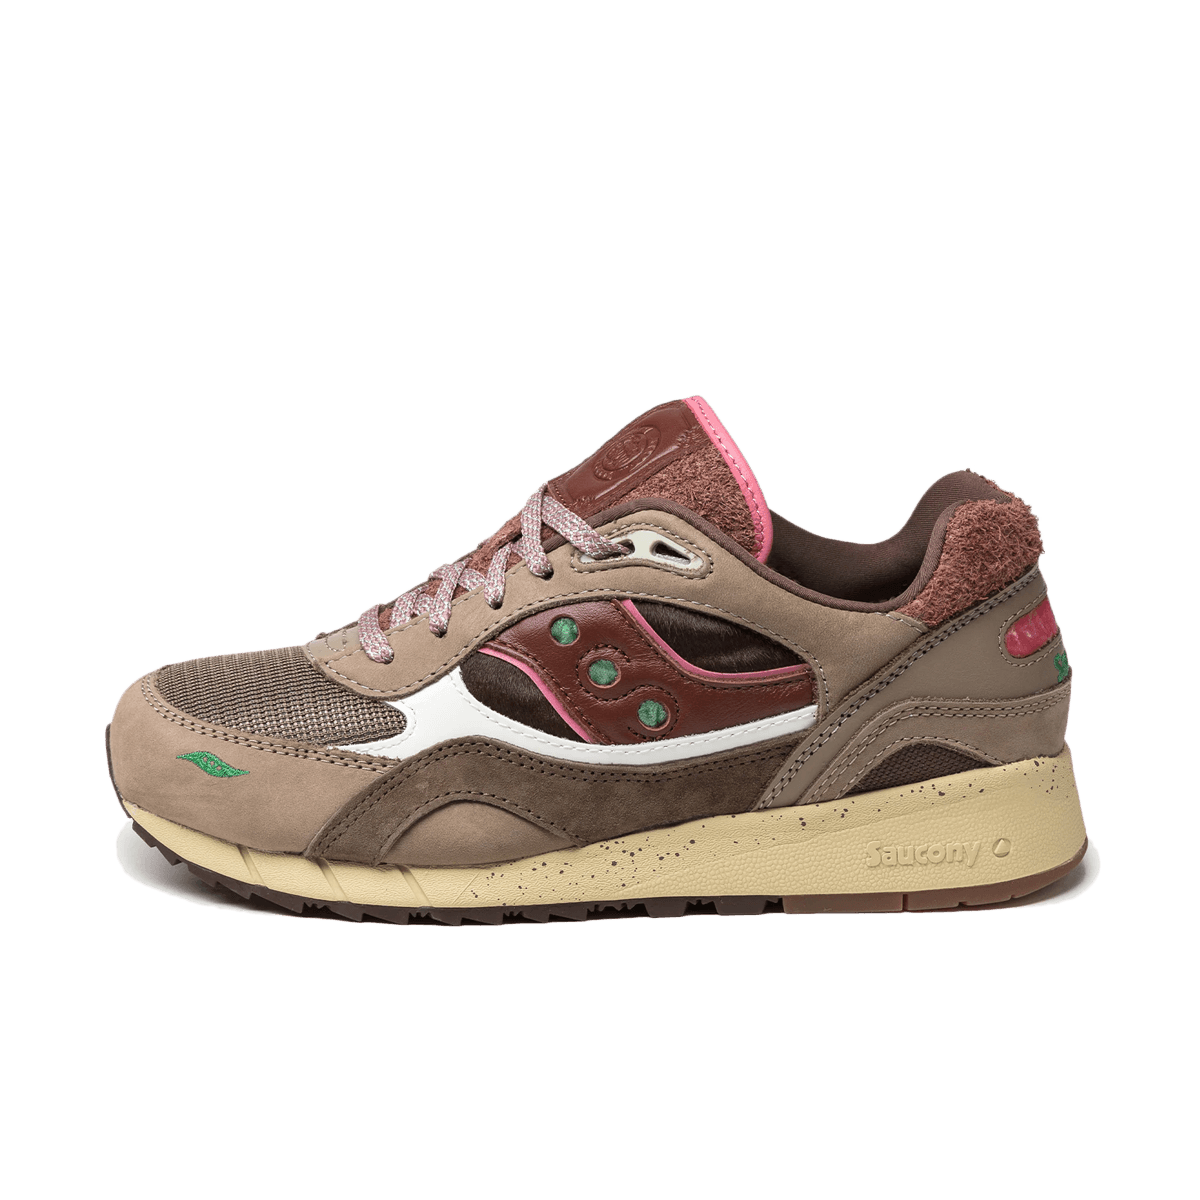 FEATURE x Saucony Shadow 6000 'Chocolate Chip'